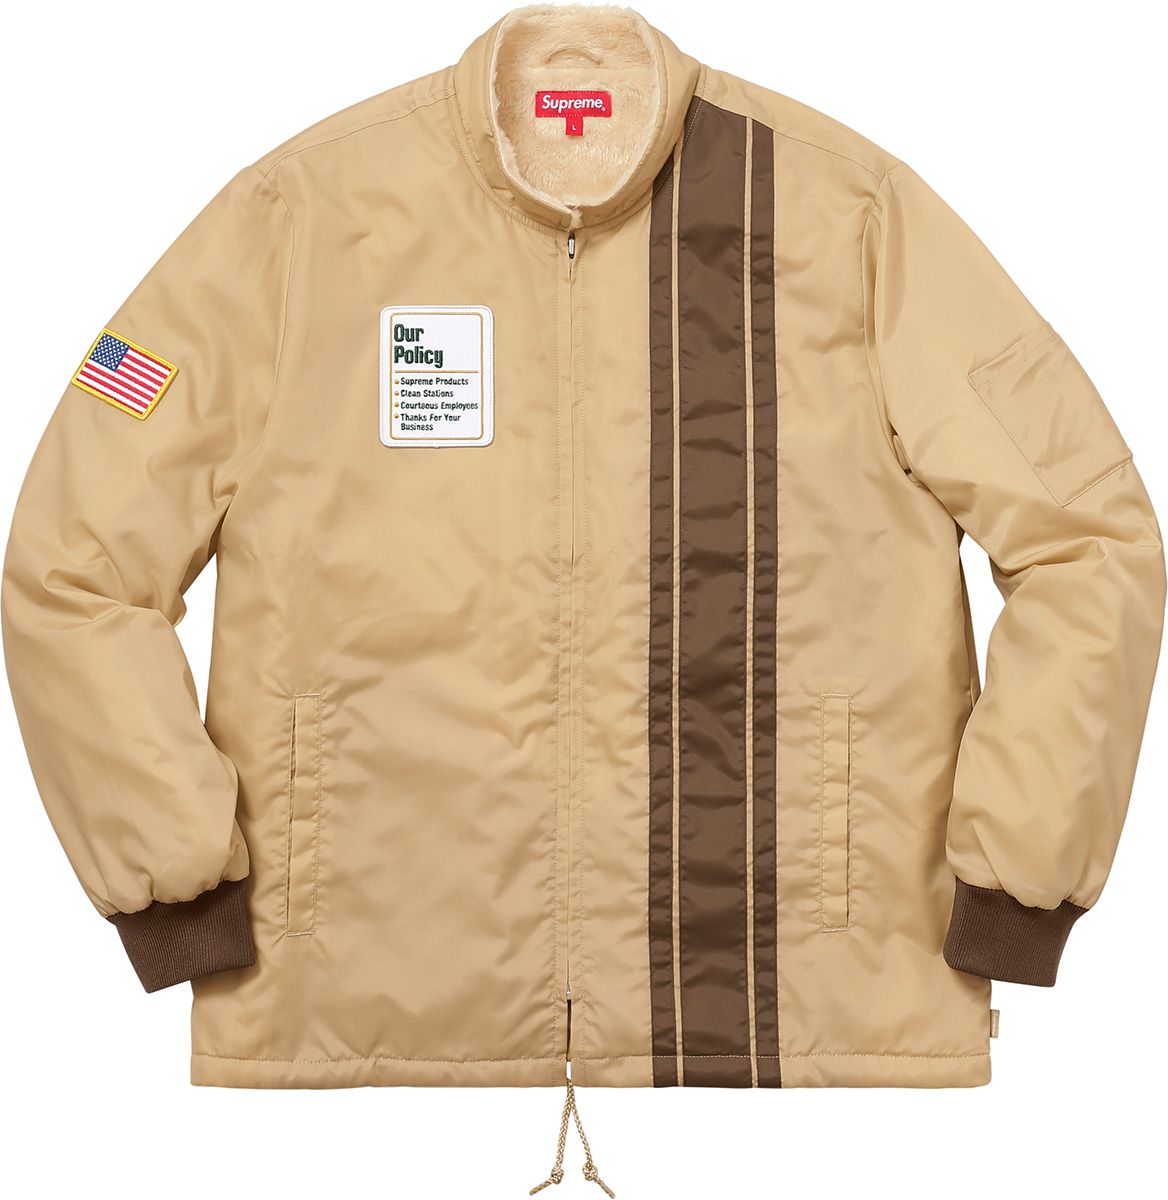 Pit Crew Jacket - Fall/Winter 2017 Preview – Supreme